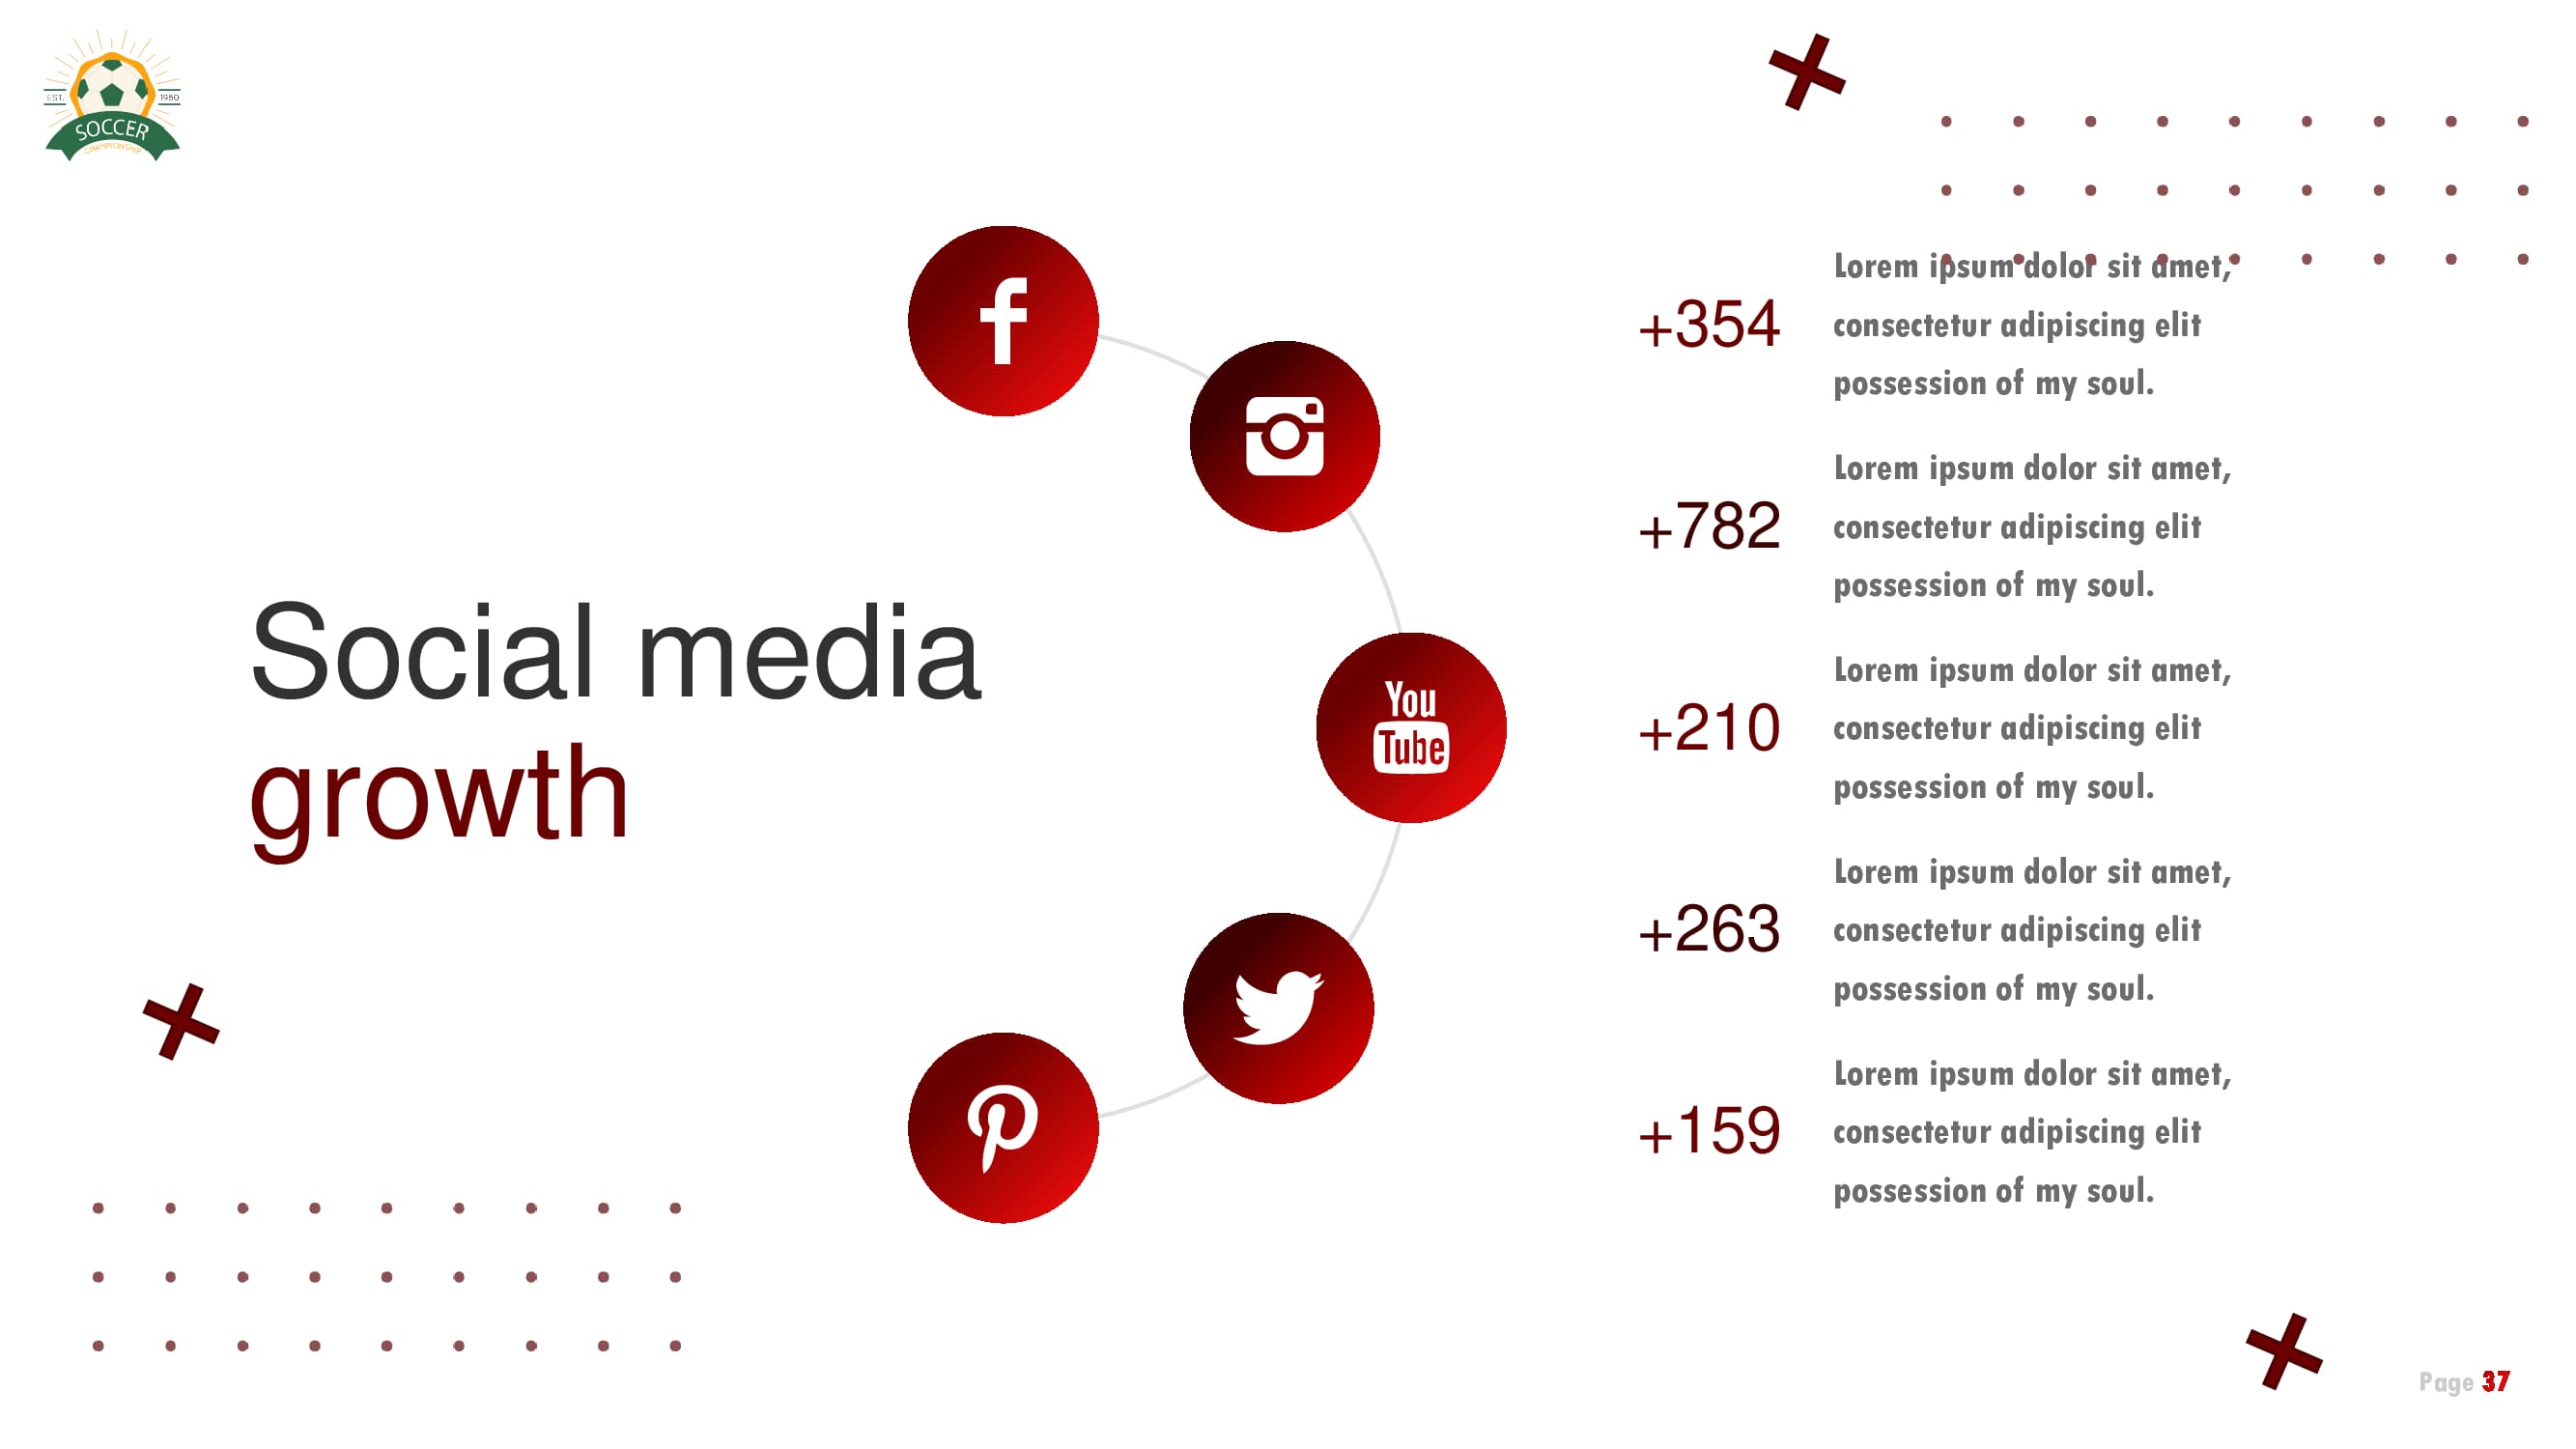 A good slide for a report on the growth in different social media.